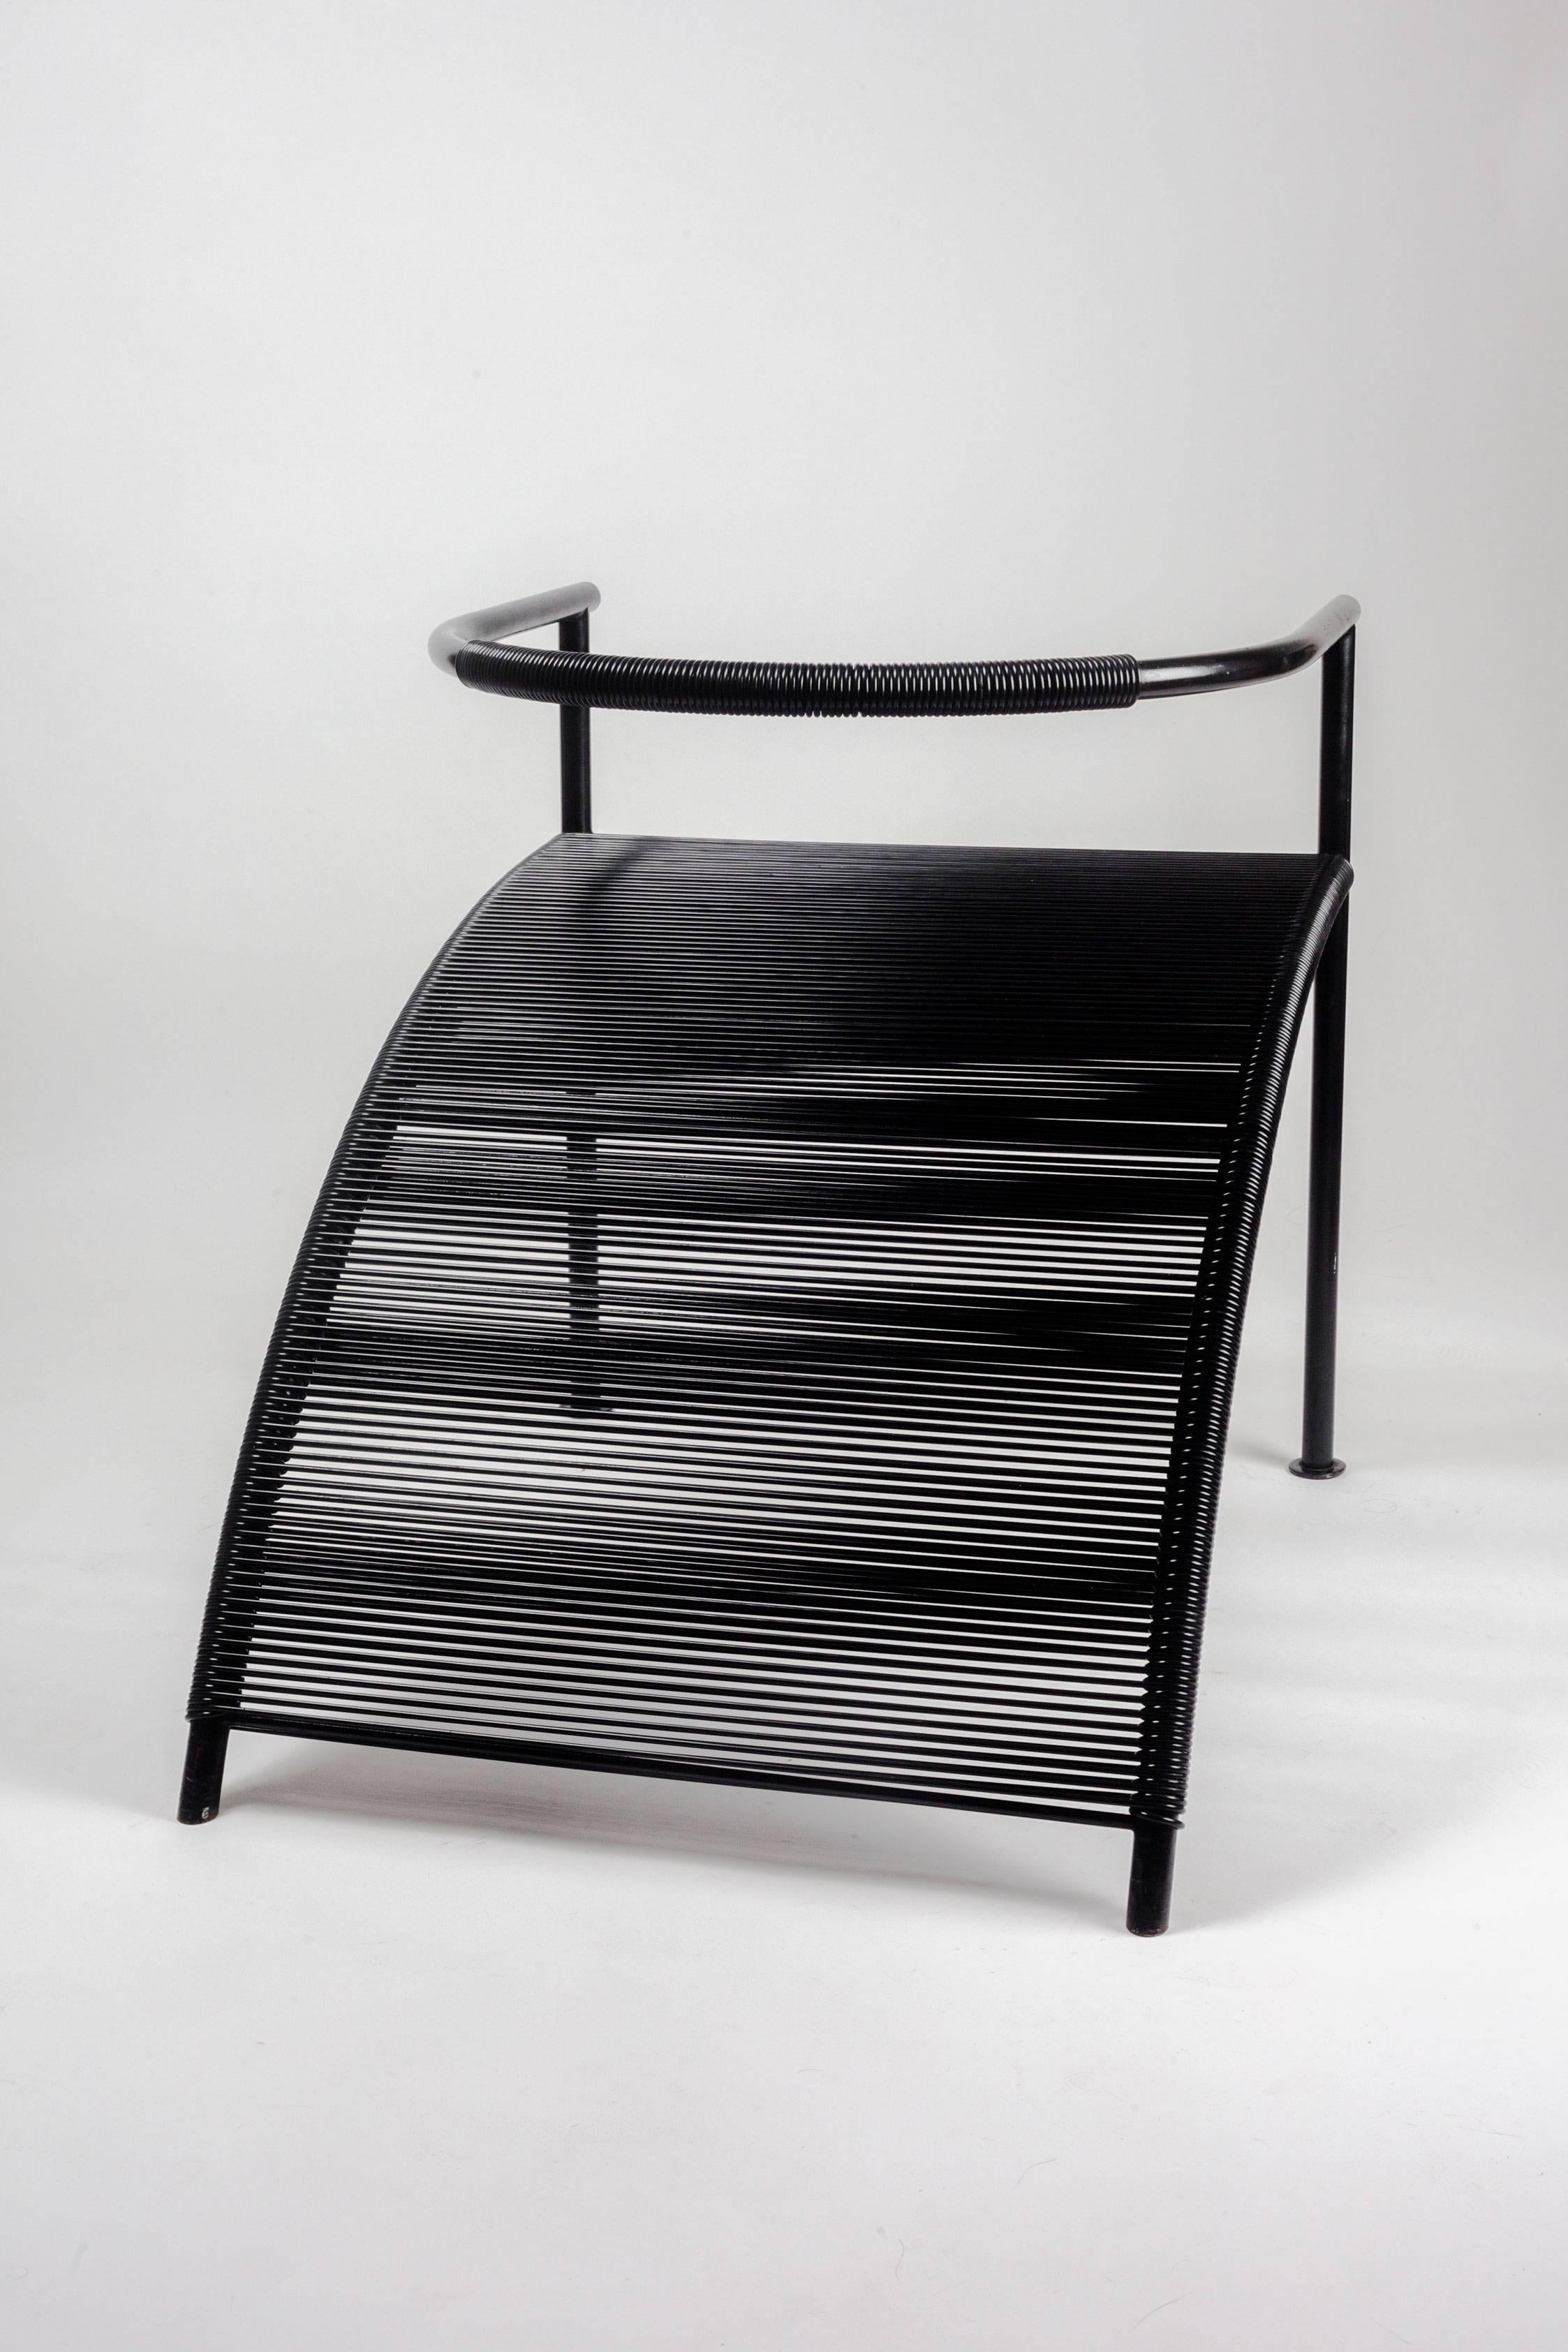 Late 20th Century Sculptural Chair by Philippe Starck for XO Paris, Black Metal and strings, 1980s